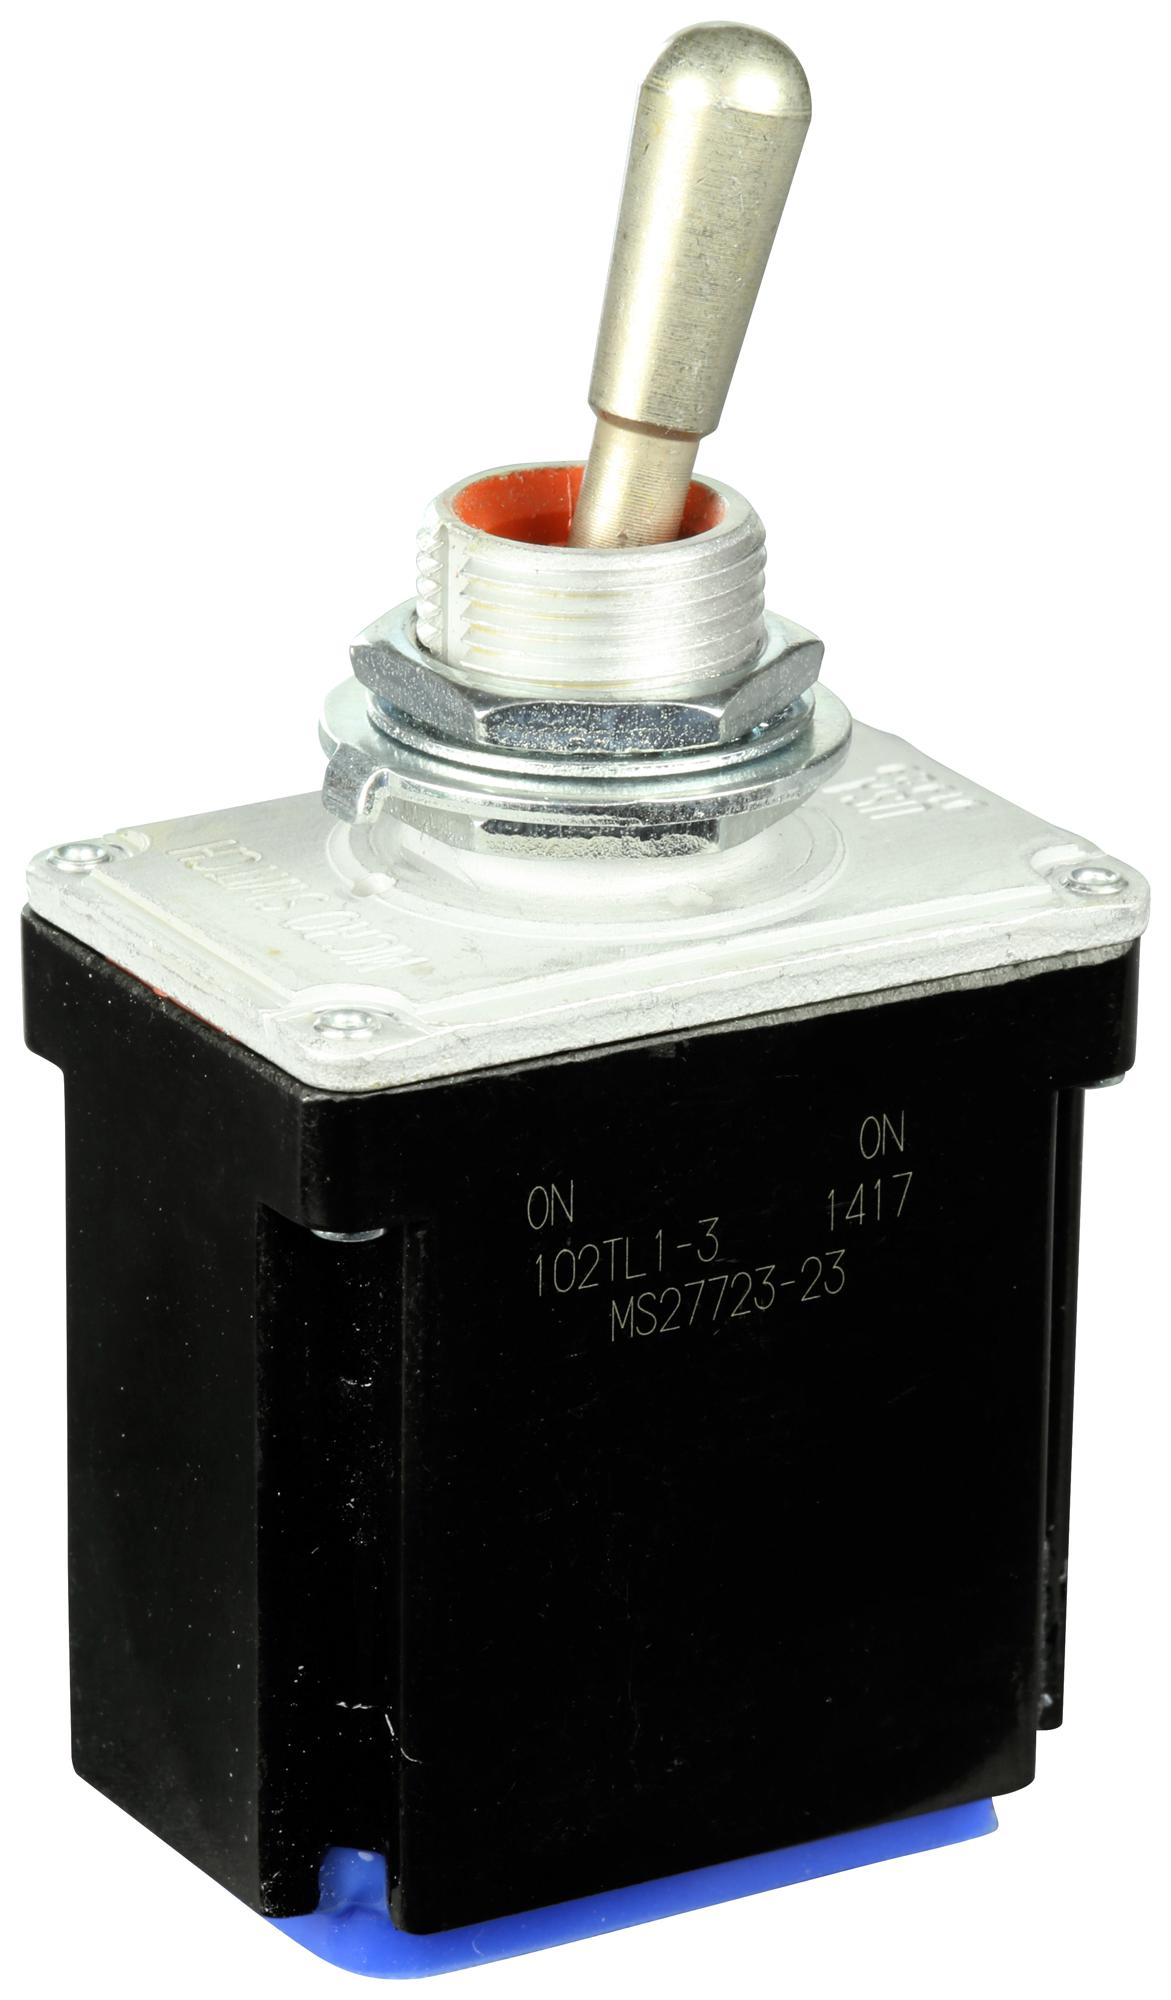 102TL2-2 TOGGLE SWITCH, DPST, 20A, 28VDC, PANEL HONEYWELL